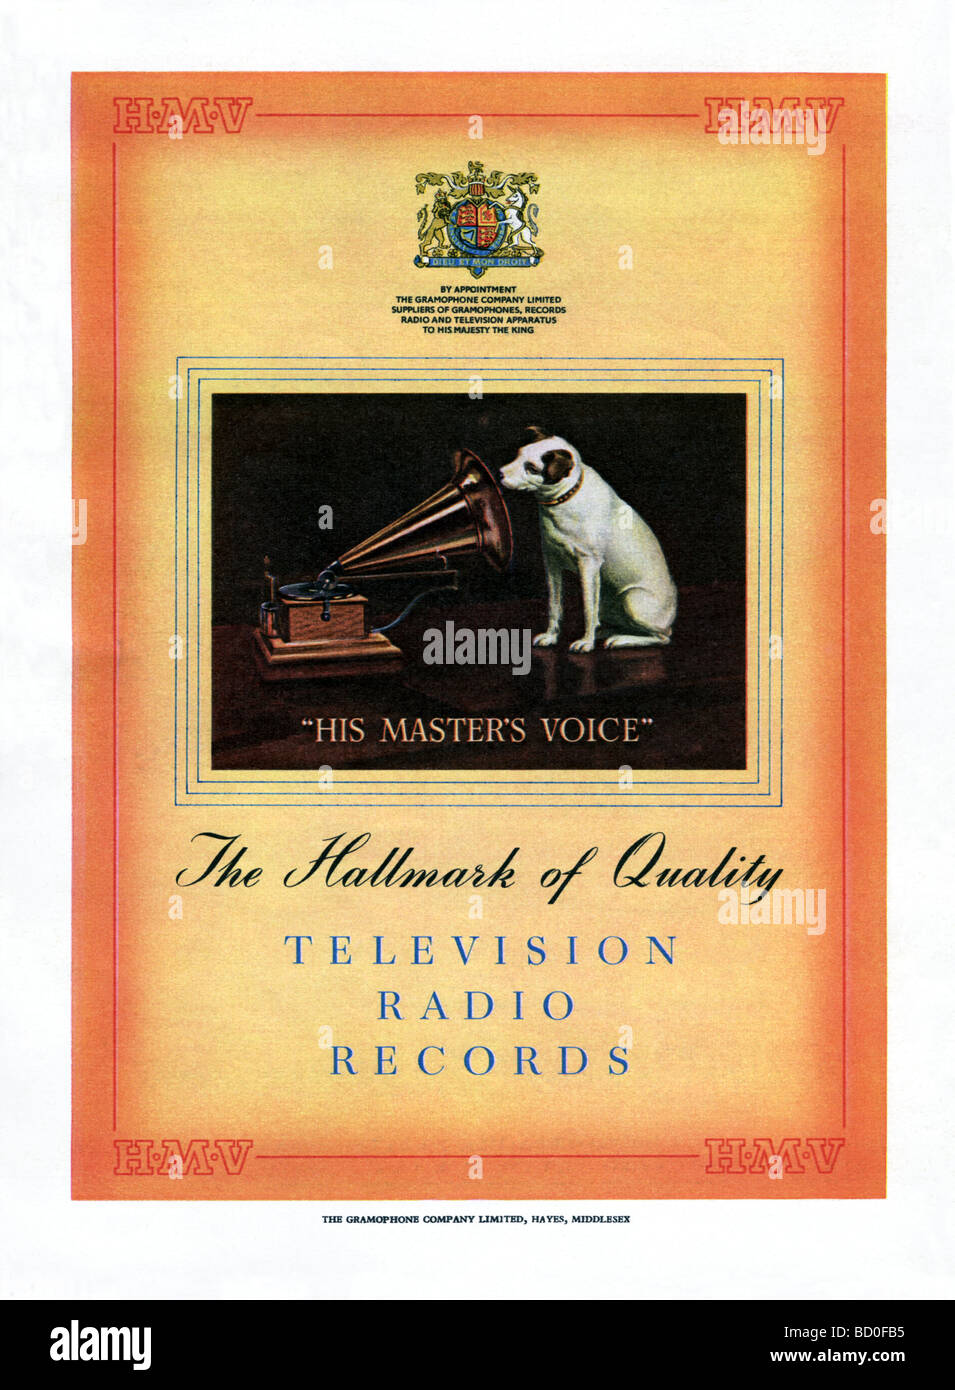 1951 advertisement for HMV records, televisions and radios Stock Photo